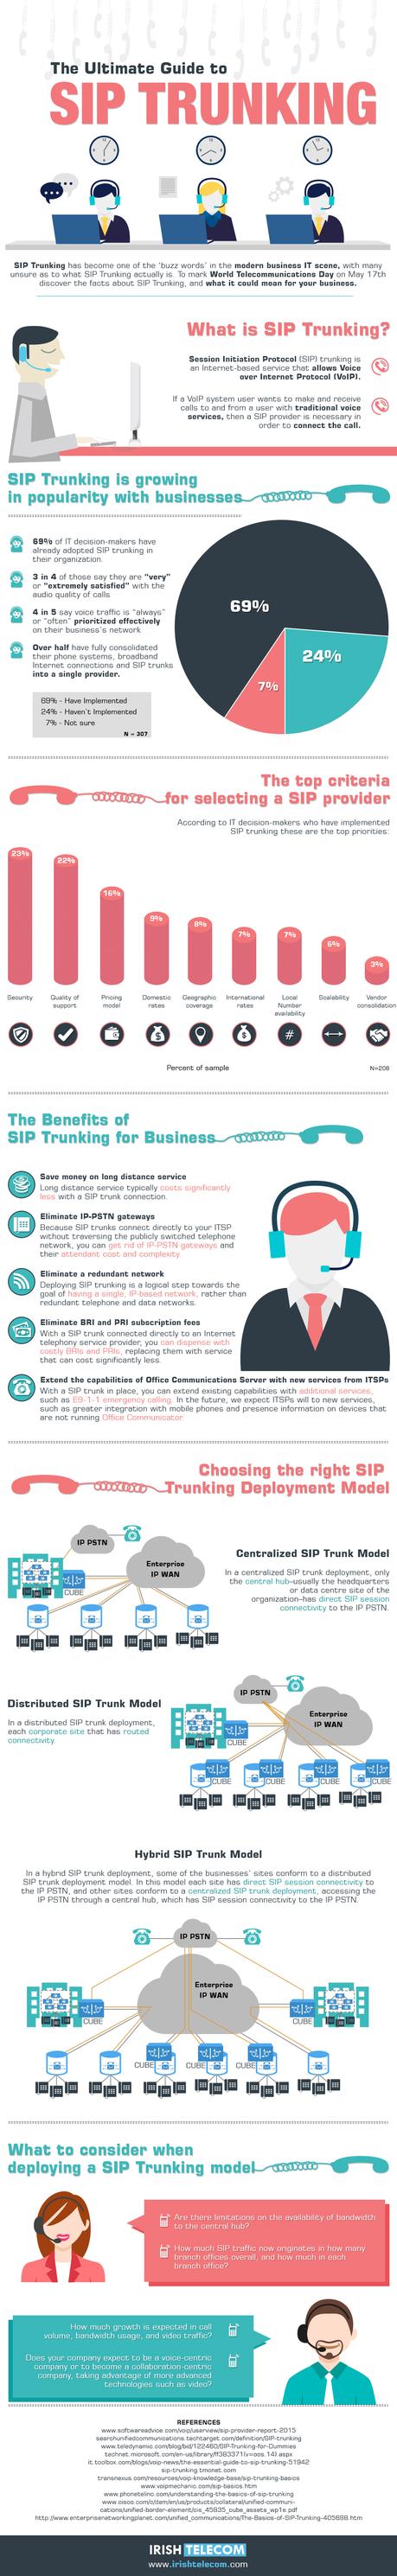 Guide-to-SIP-Trunking-Infographic